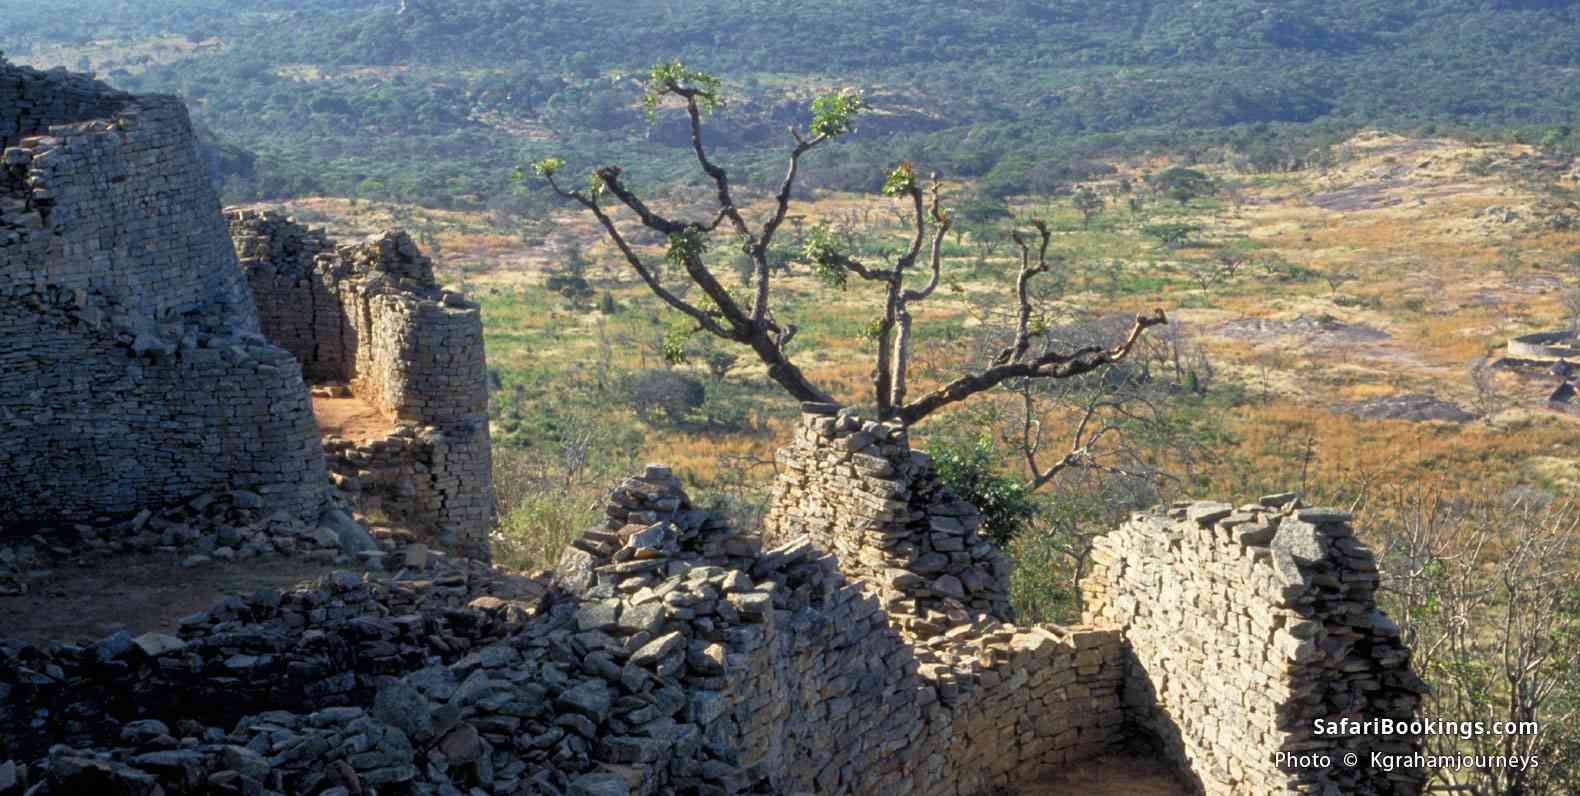 View from the ruins of Great Zimbabwe